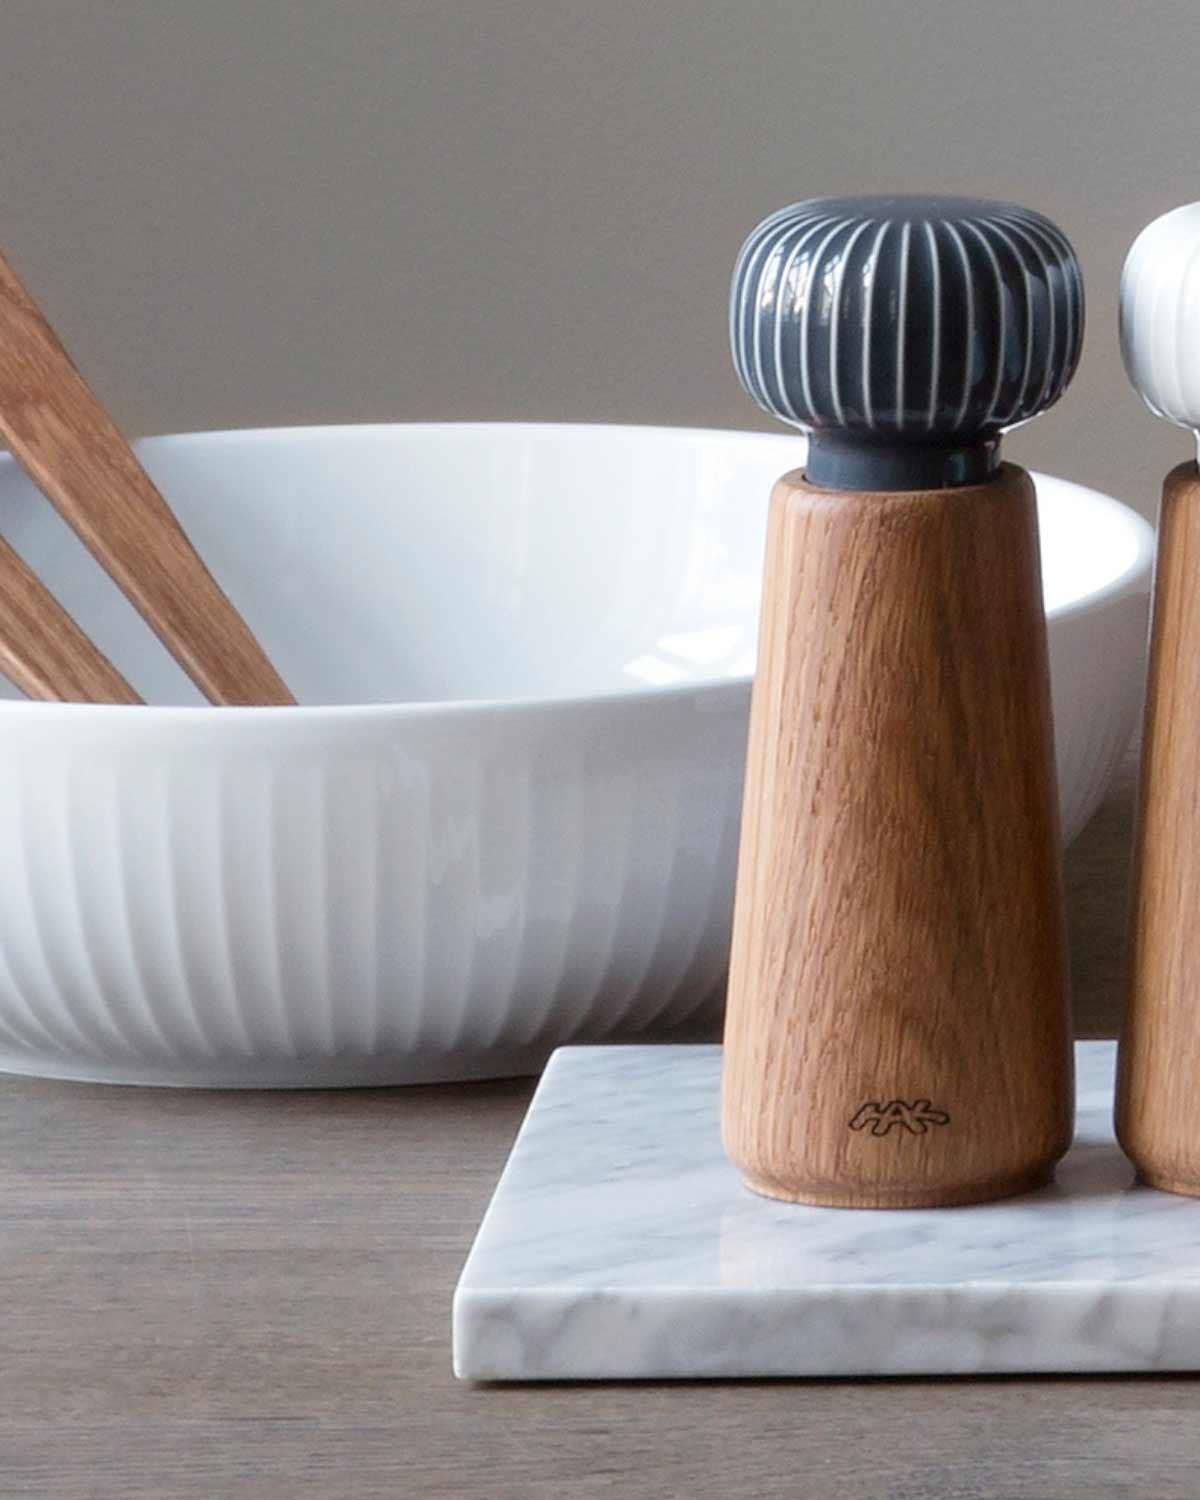 8 Mod Kitchen Accessories to Fulfill Your Danish Design Desires